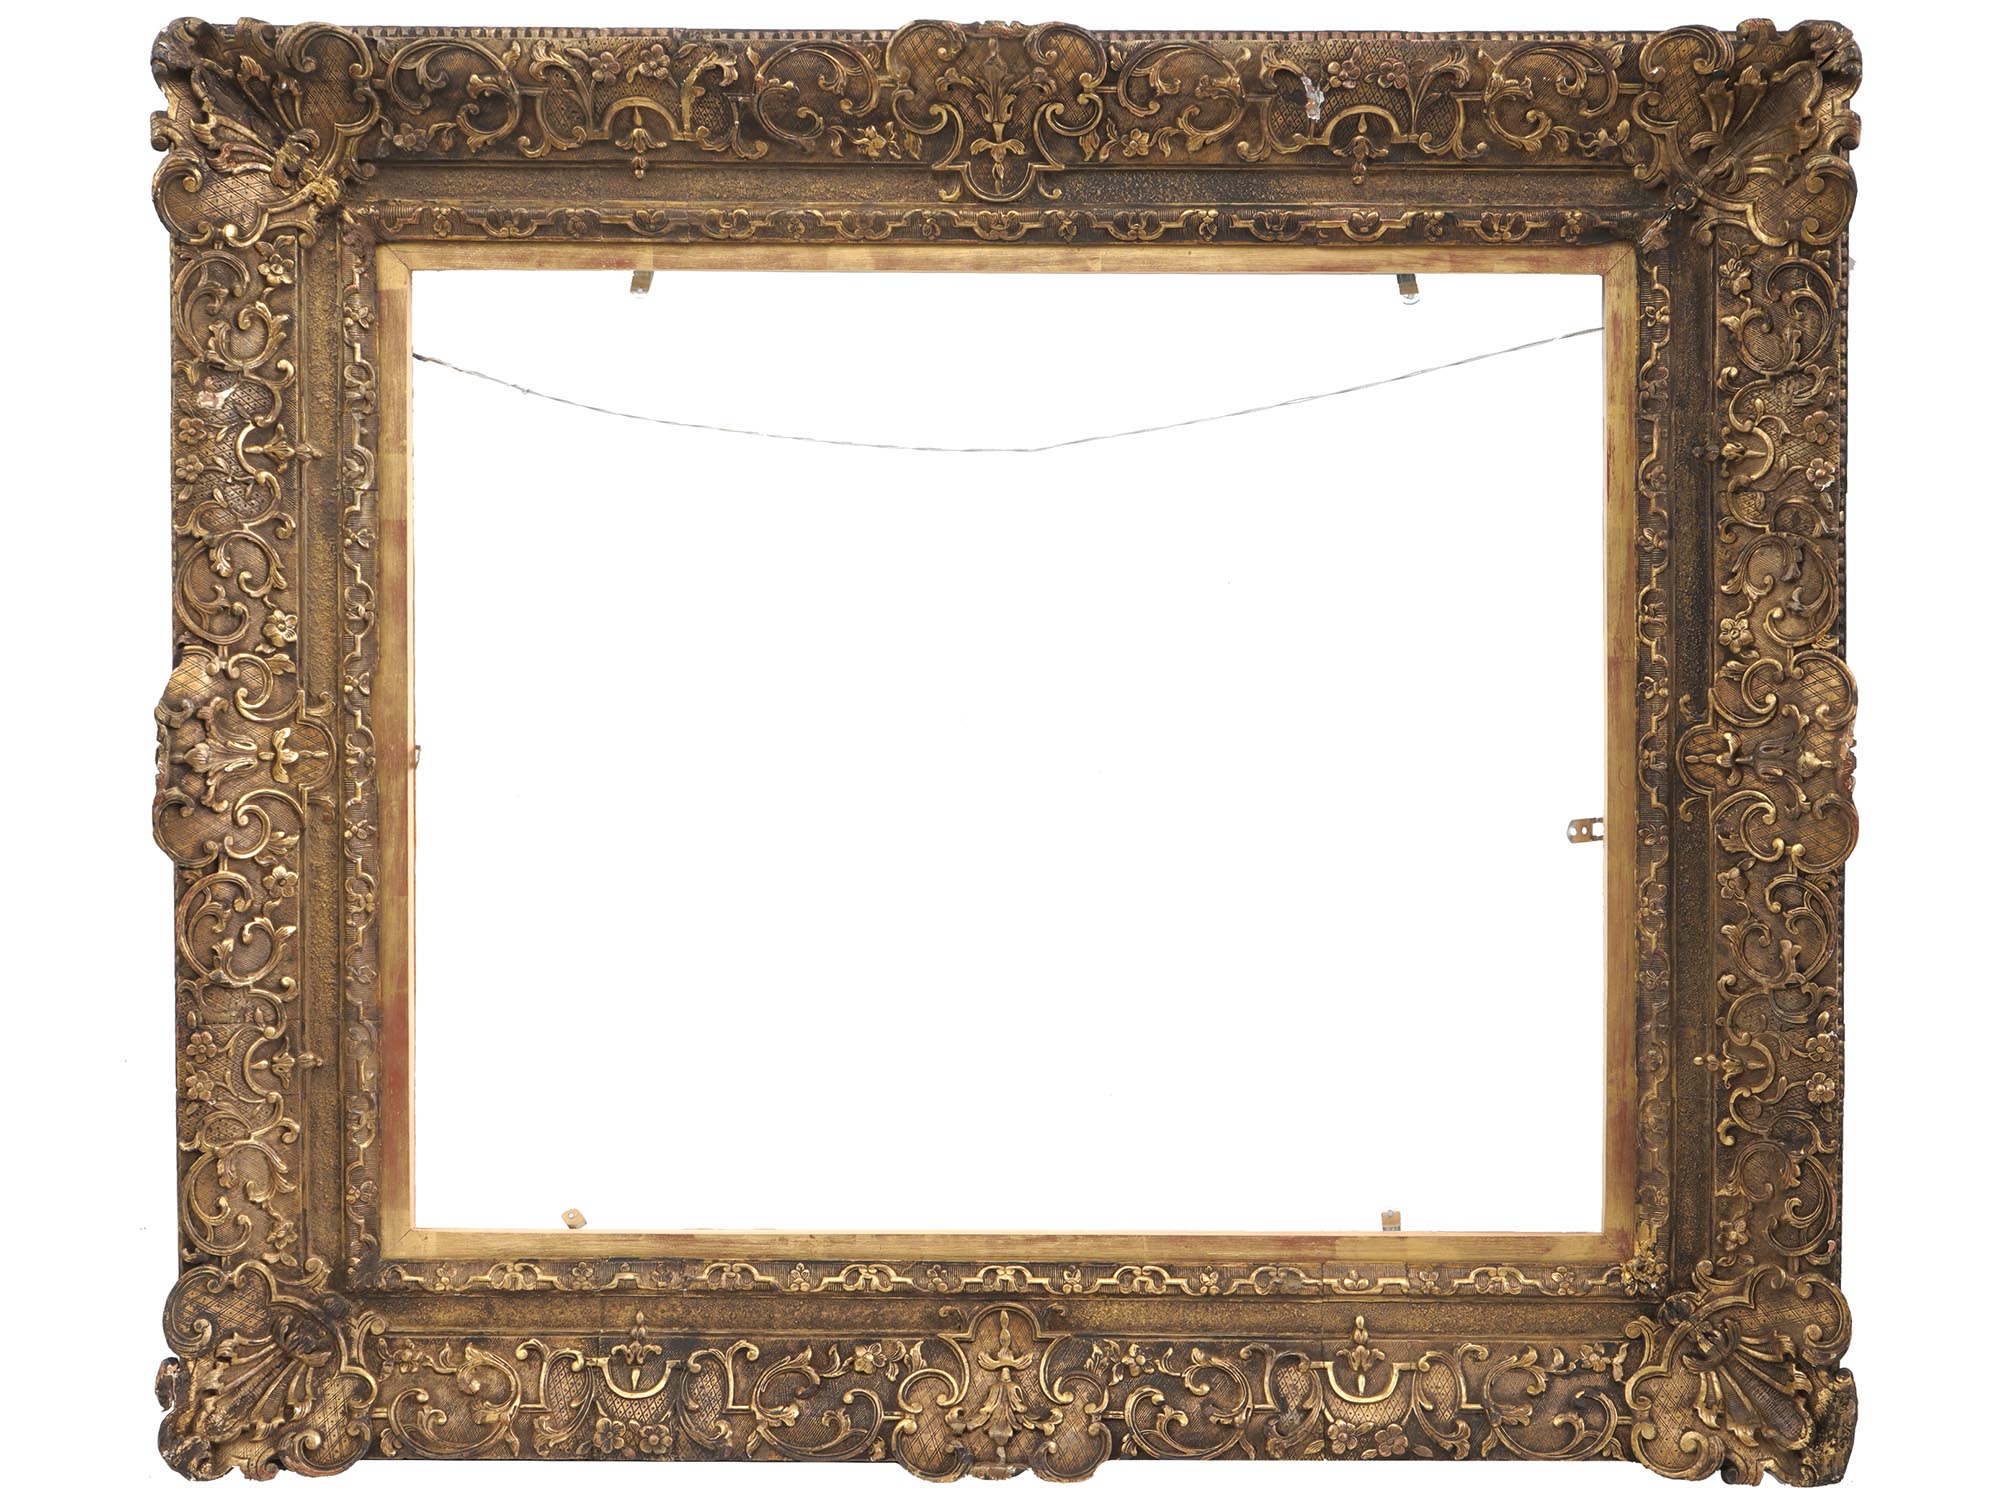 ANTIQUE FRENCH ORNATE GILT WOODEN PICTURE FRAME PIC-0